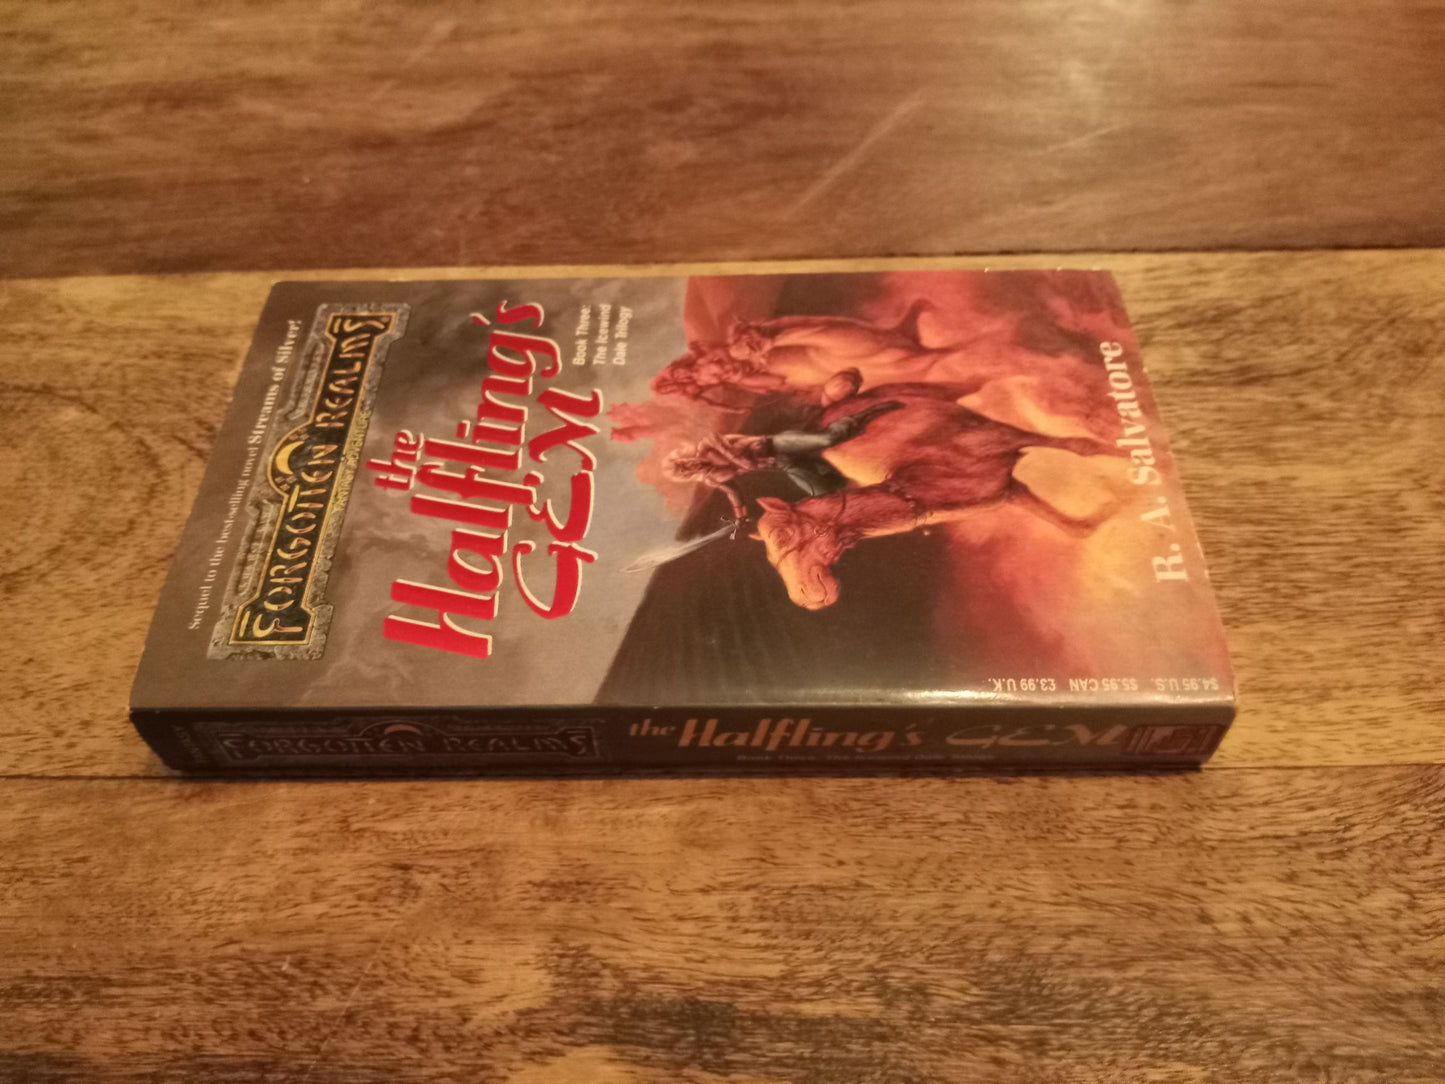 Forgotten Realms The Halfling's Gem The Icewind Dale Trilogy #3 R.A. Salvatore